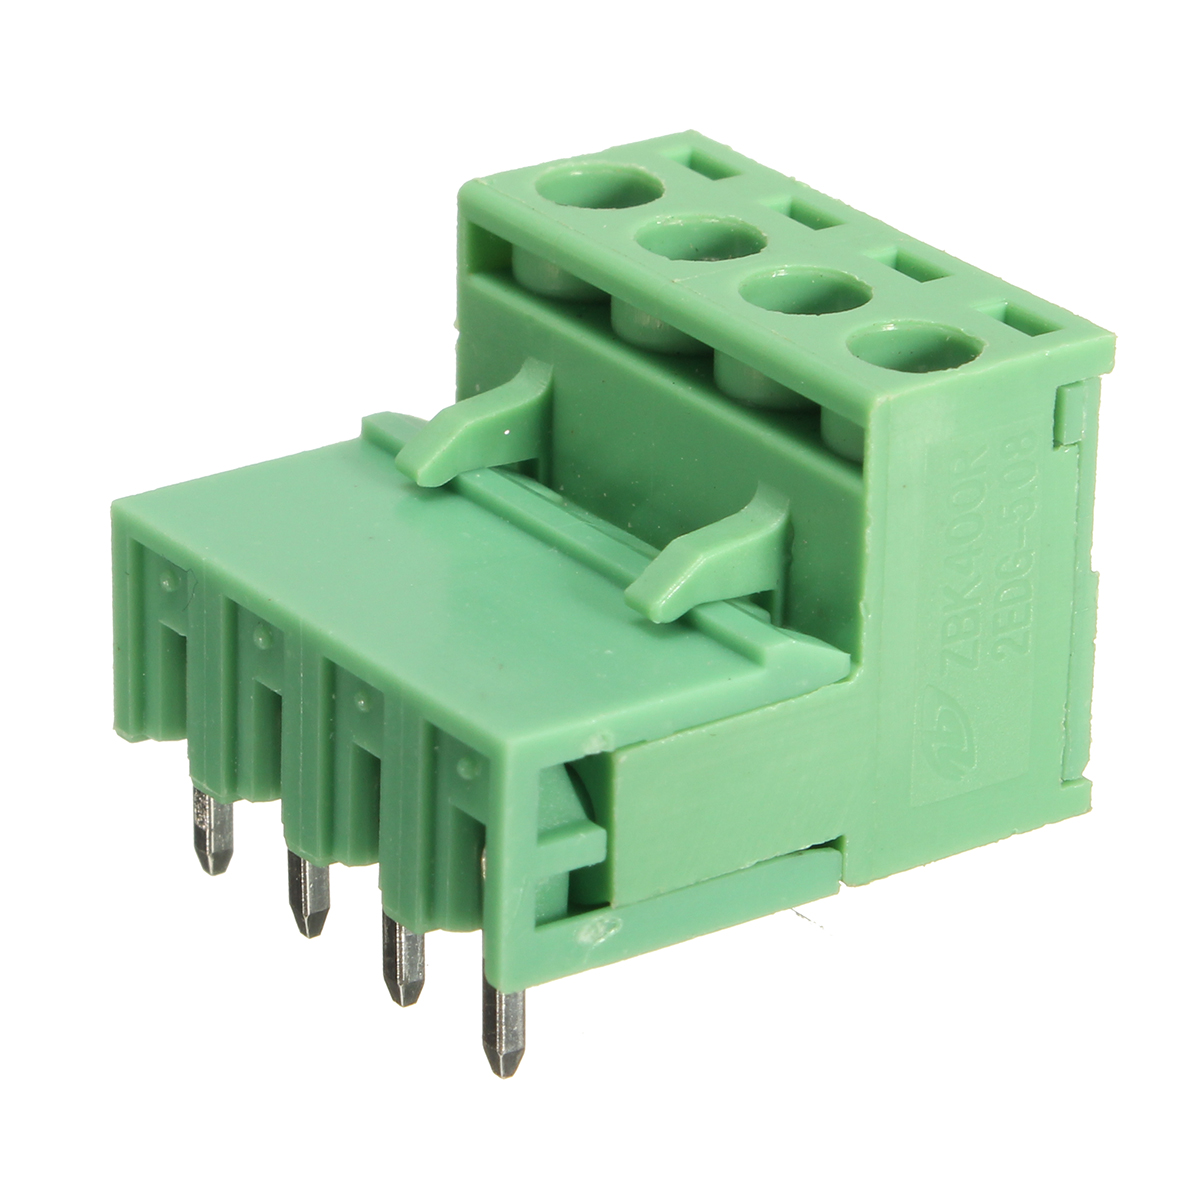 

2EDG 5.08mm Pitch 4 Pin Plug-in Screw Terminal Block Connector Right Angle